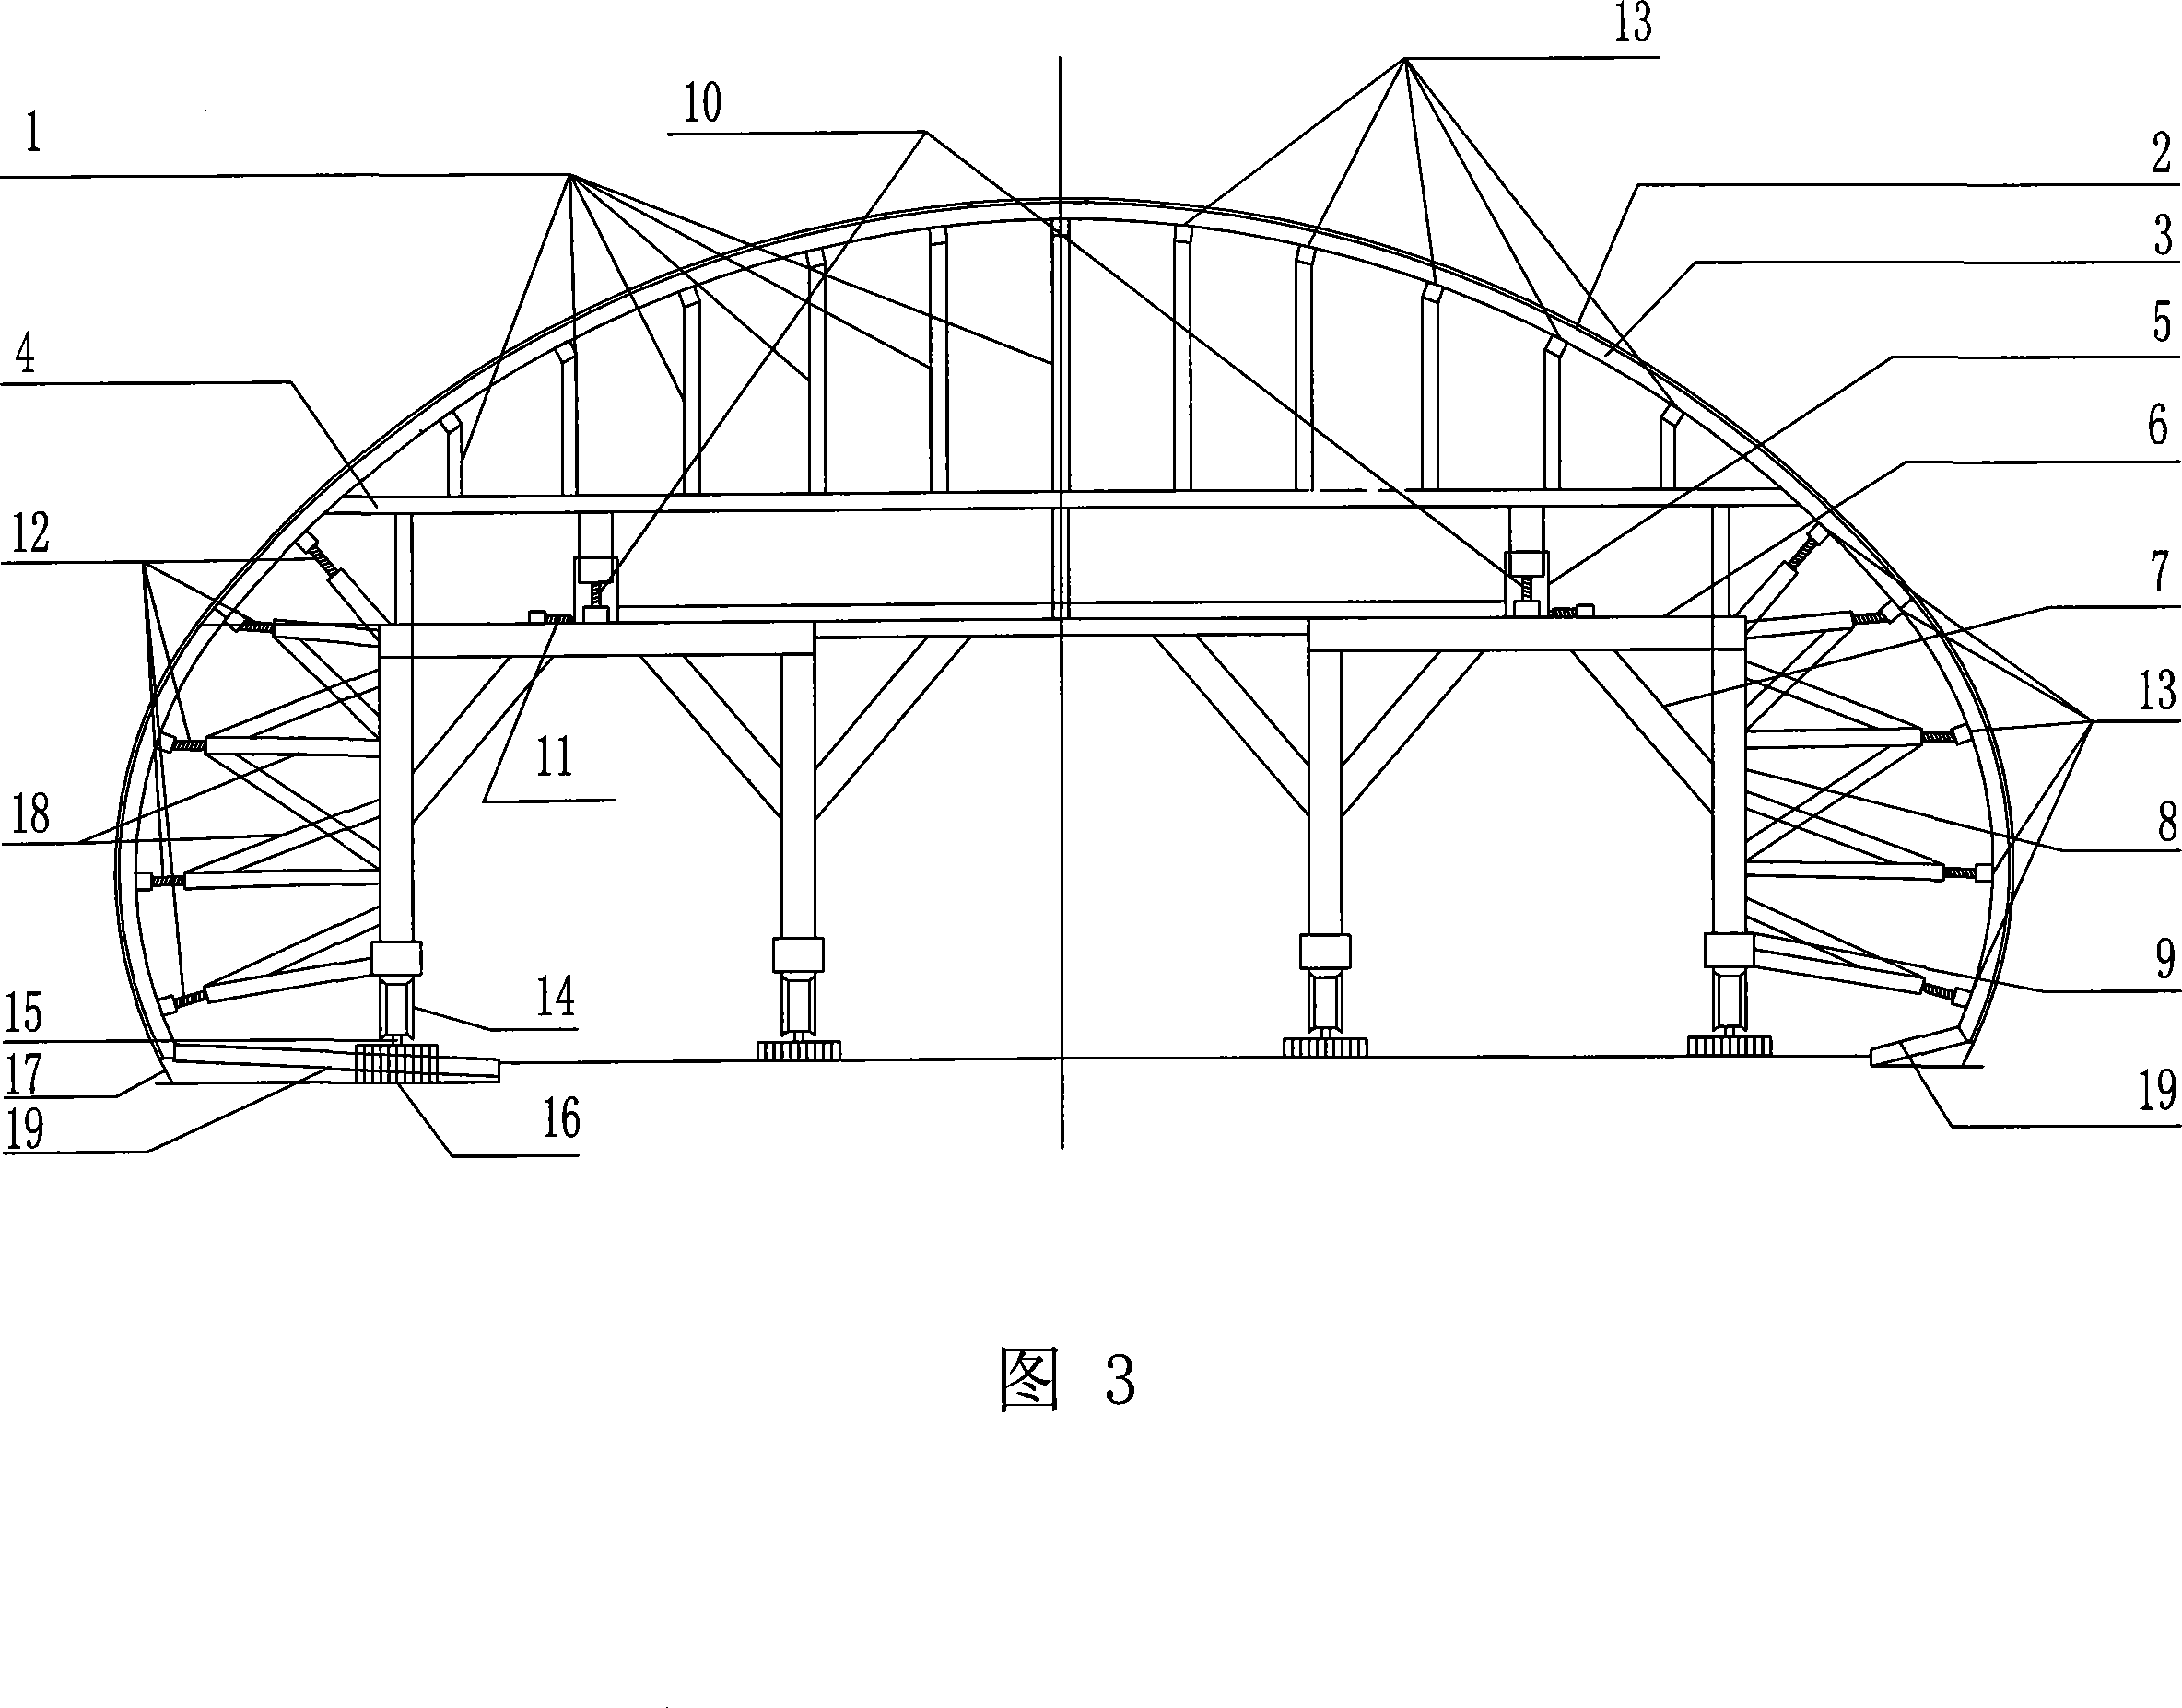 Construction method for large section and multiple sections tunnel lining